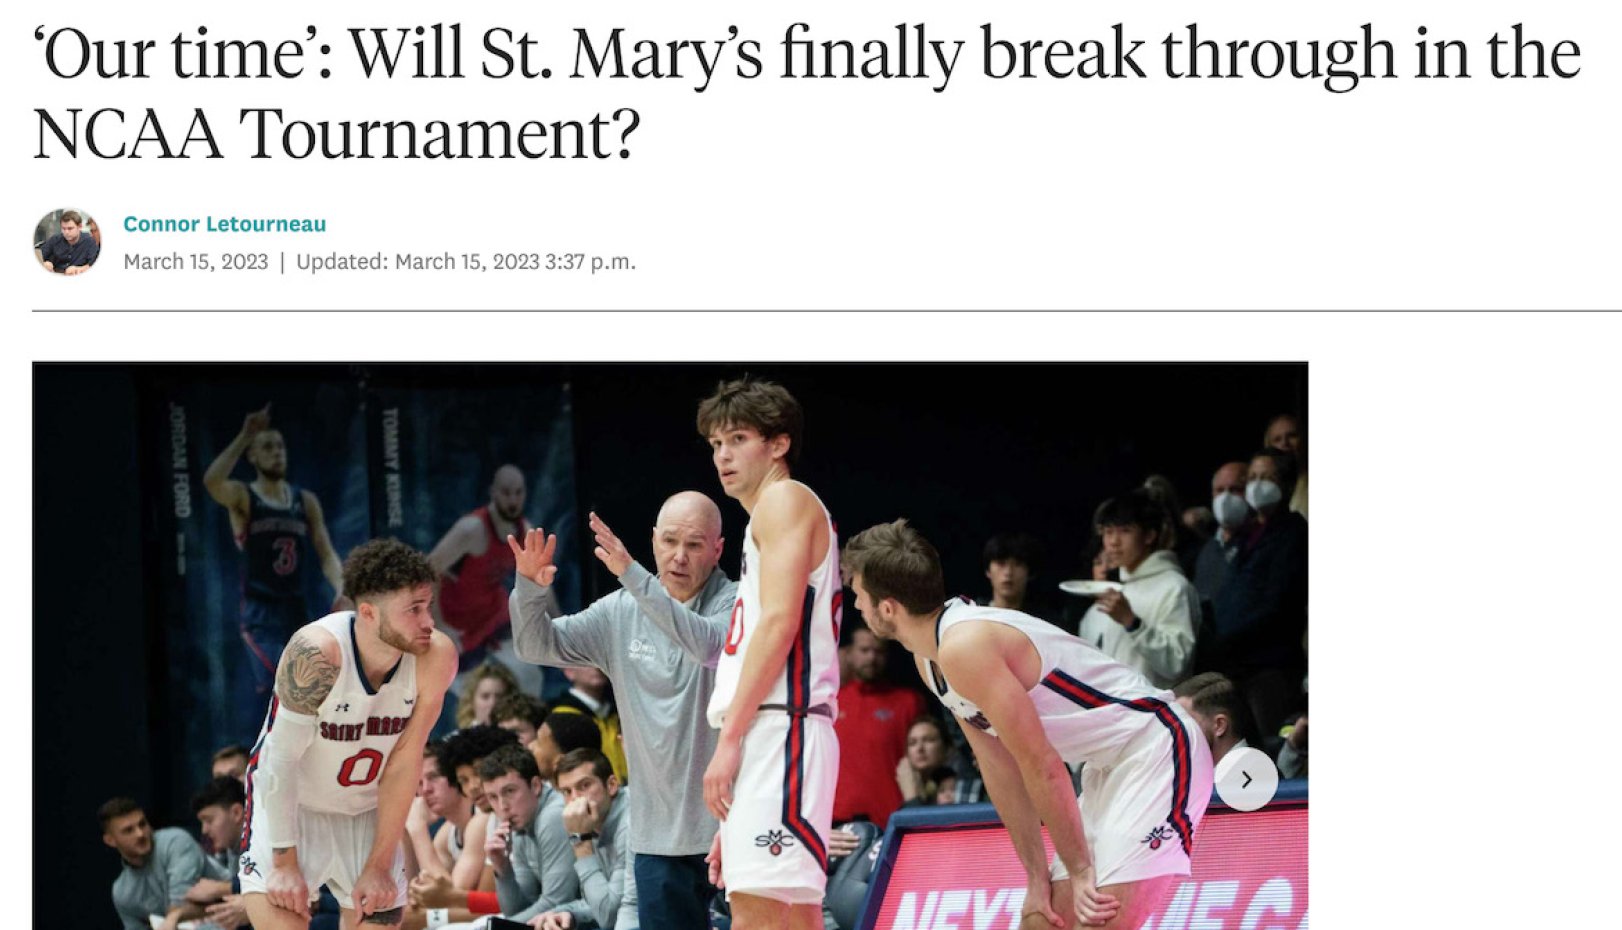 Basketball players and headline 'Our Time': Will Saint Mary's finally break through in the NCAA Tournament?